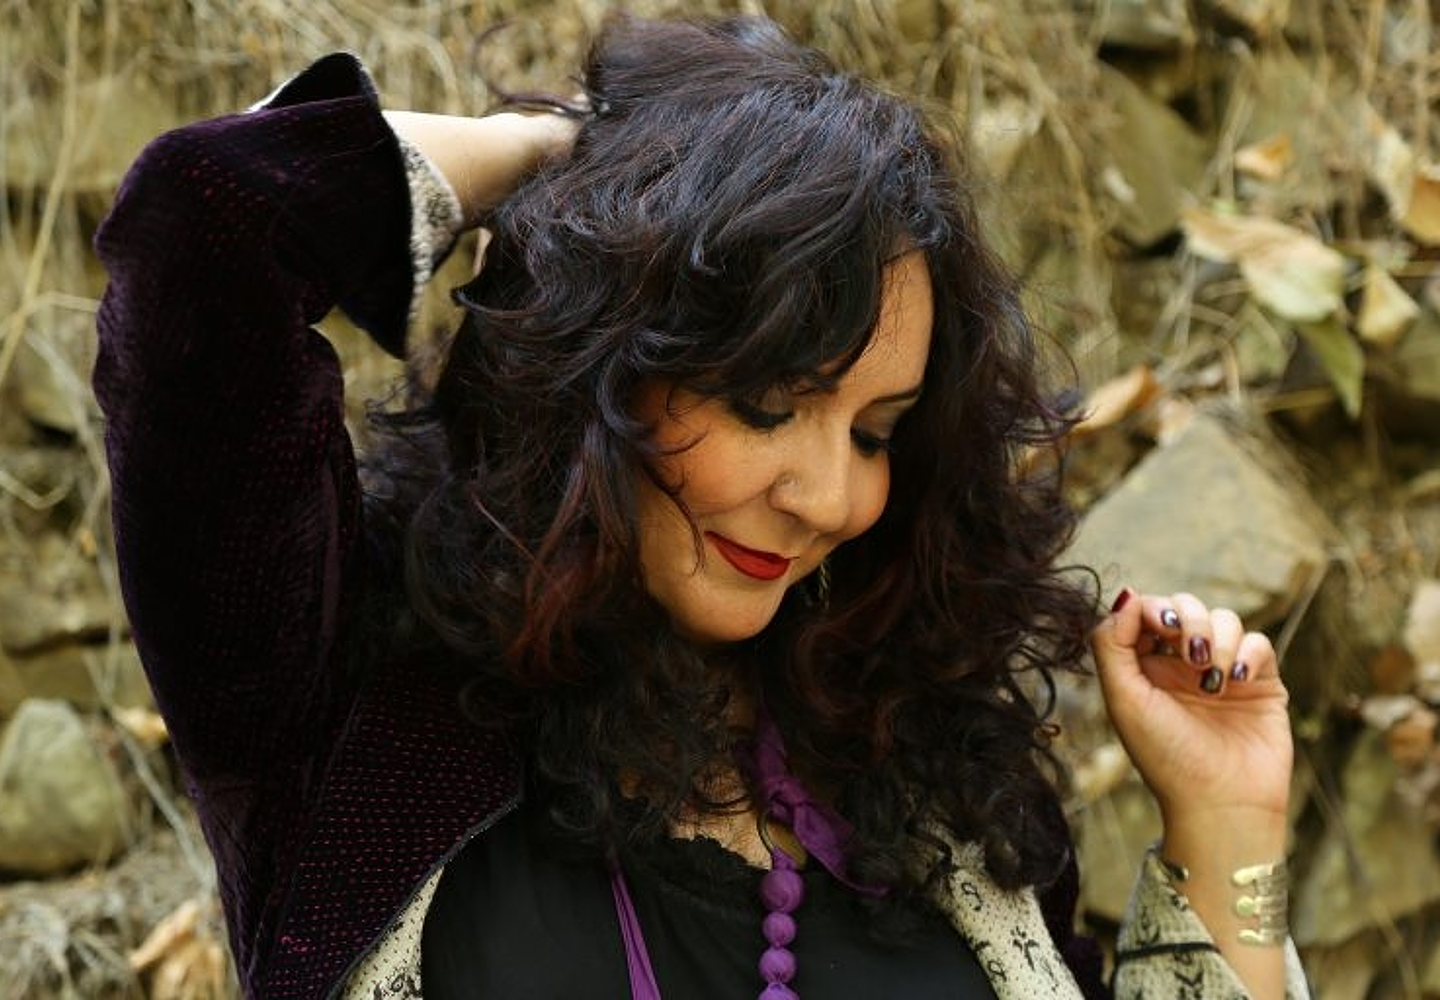 Mahsa Vahdat: My Voice Is My Home